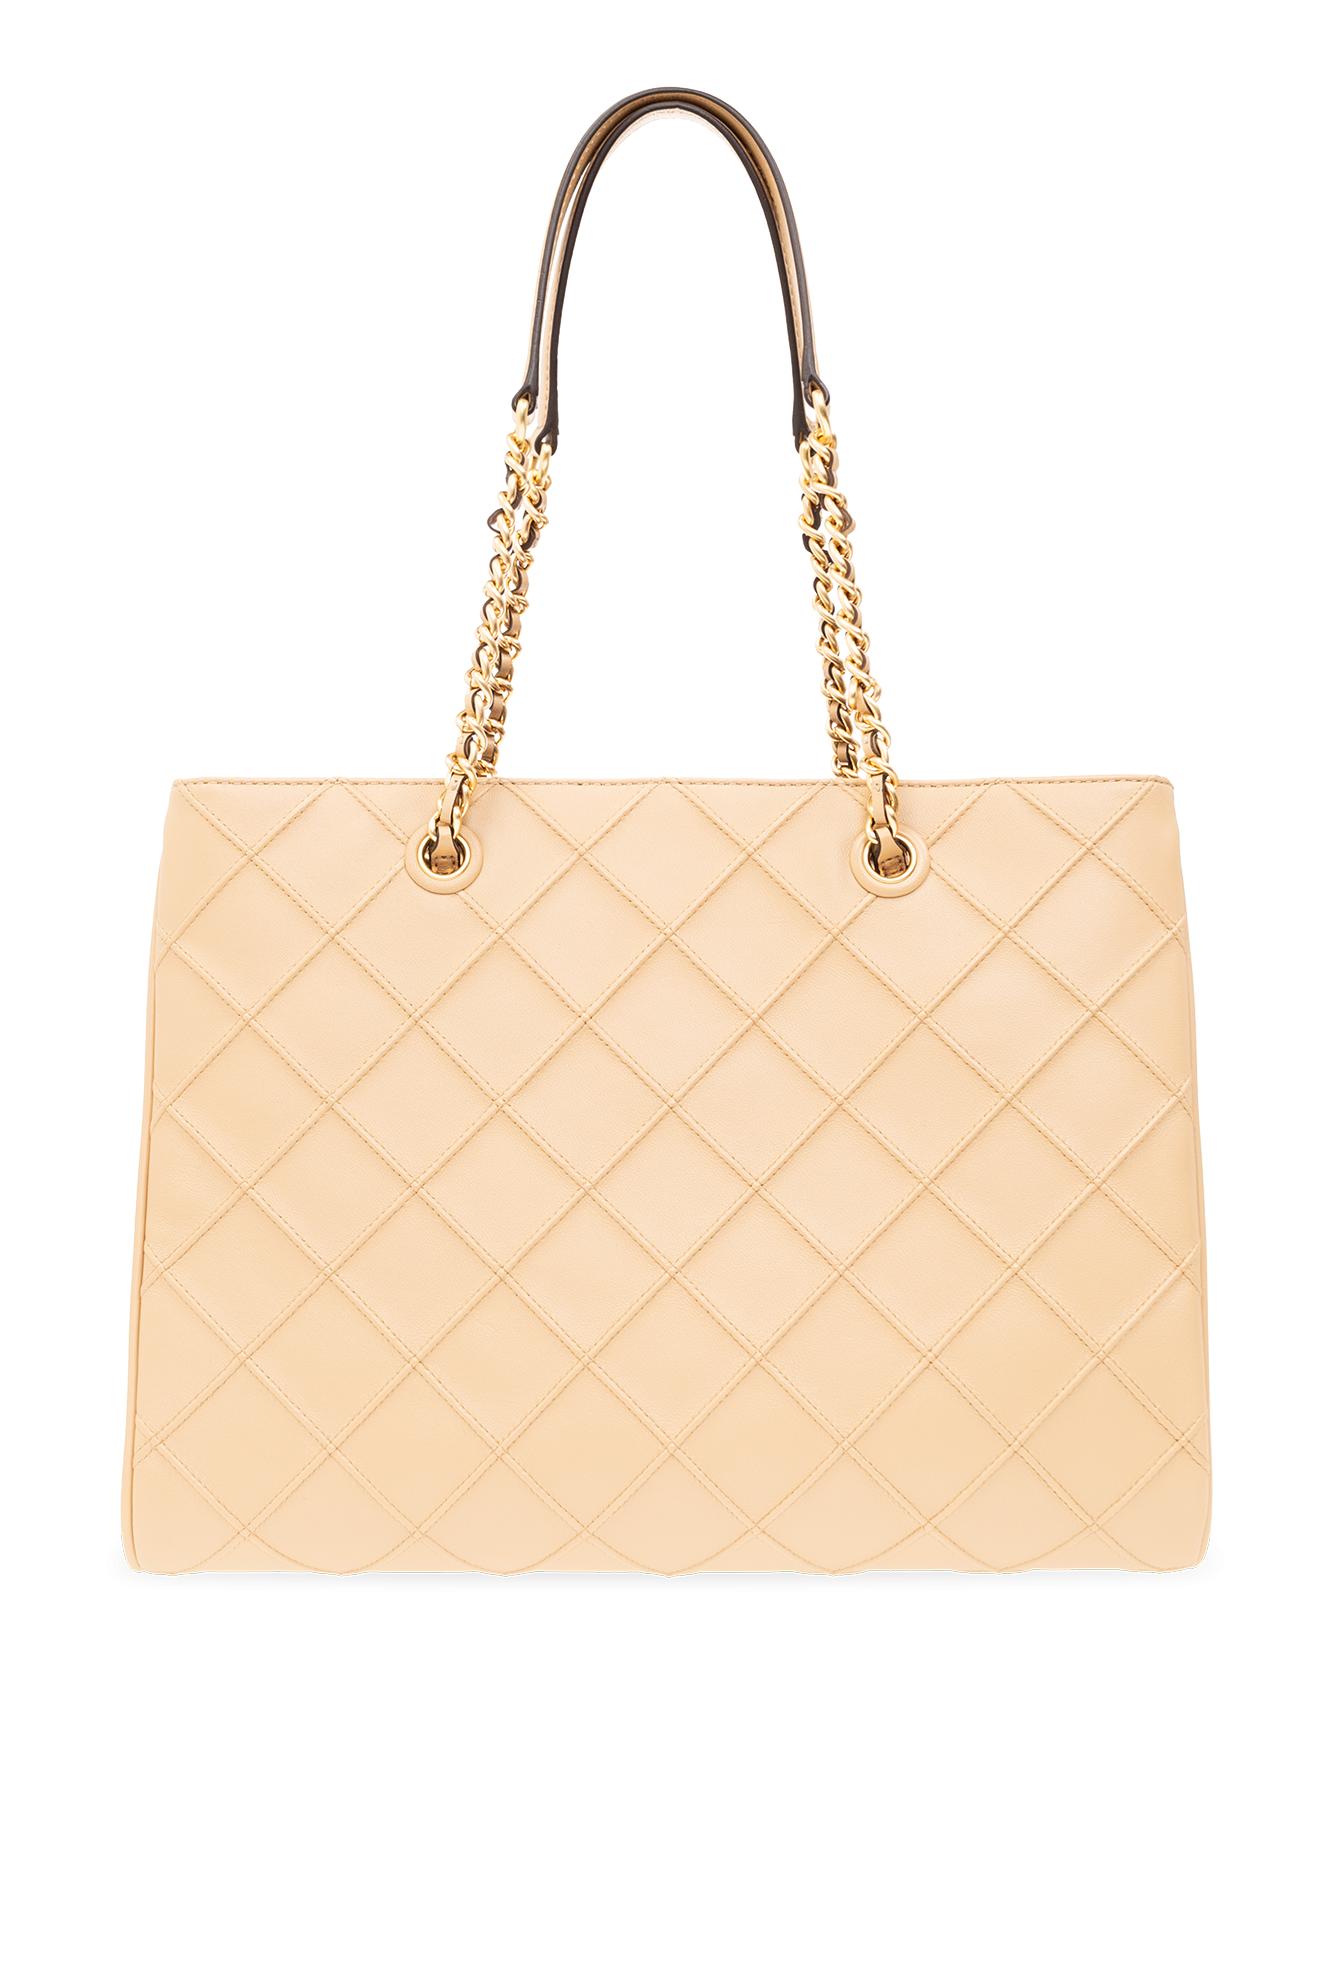 Tory Burch Fleming Shopping Bag in Quilted Leather